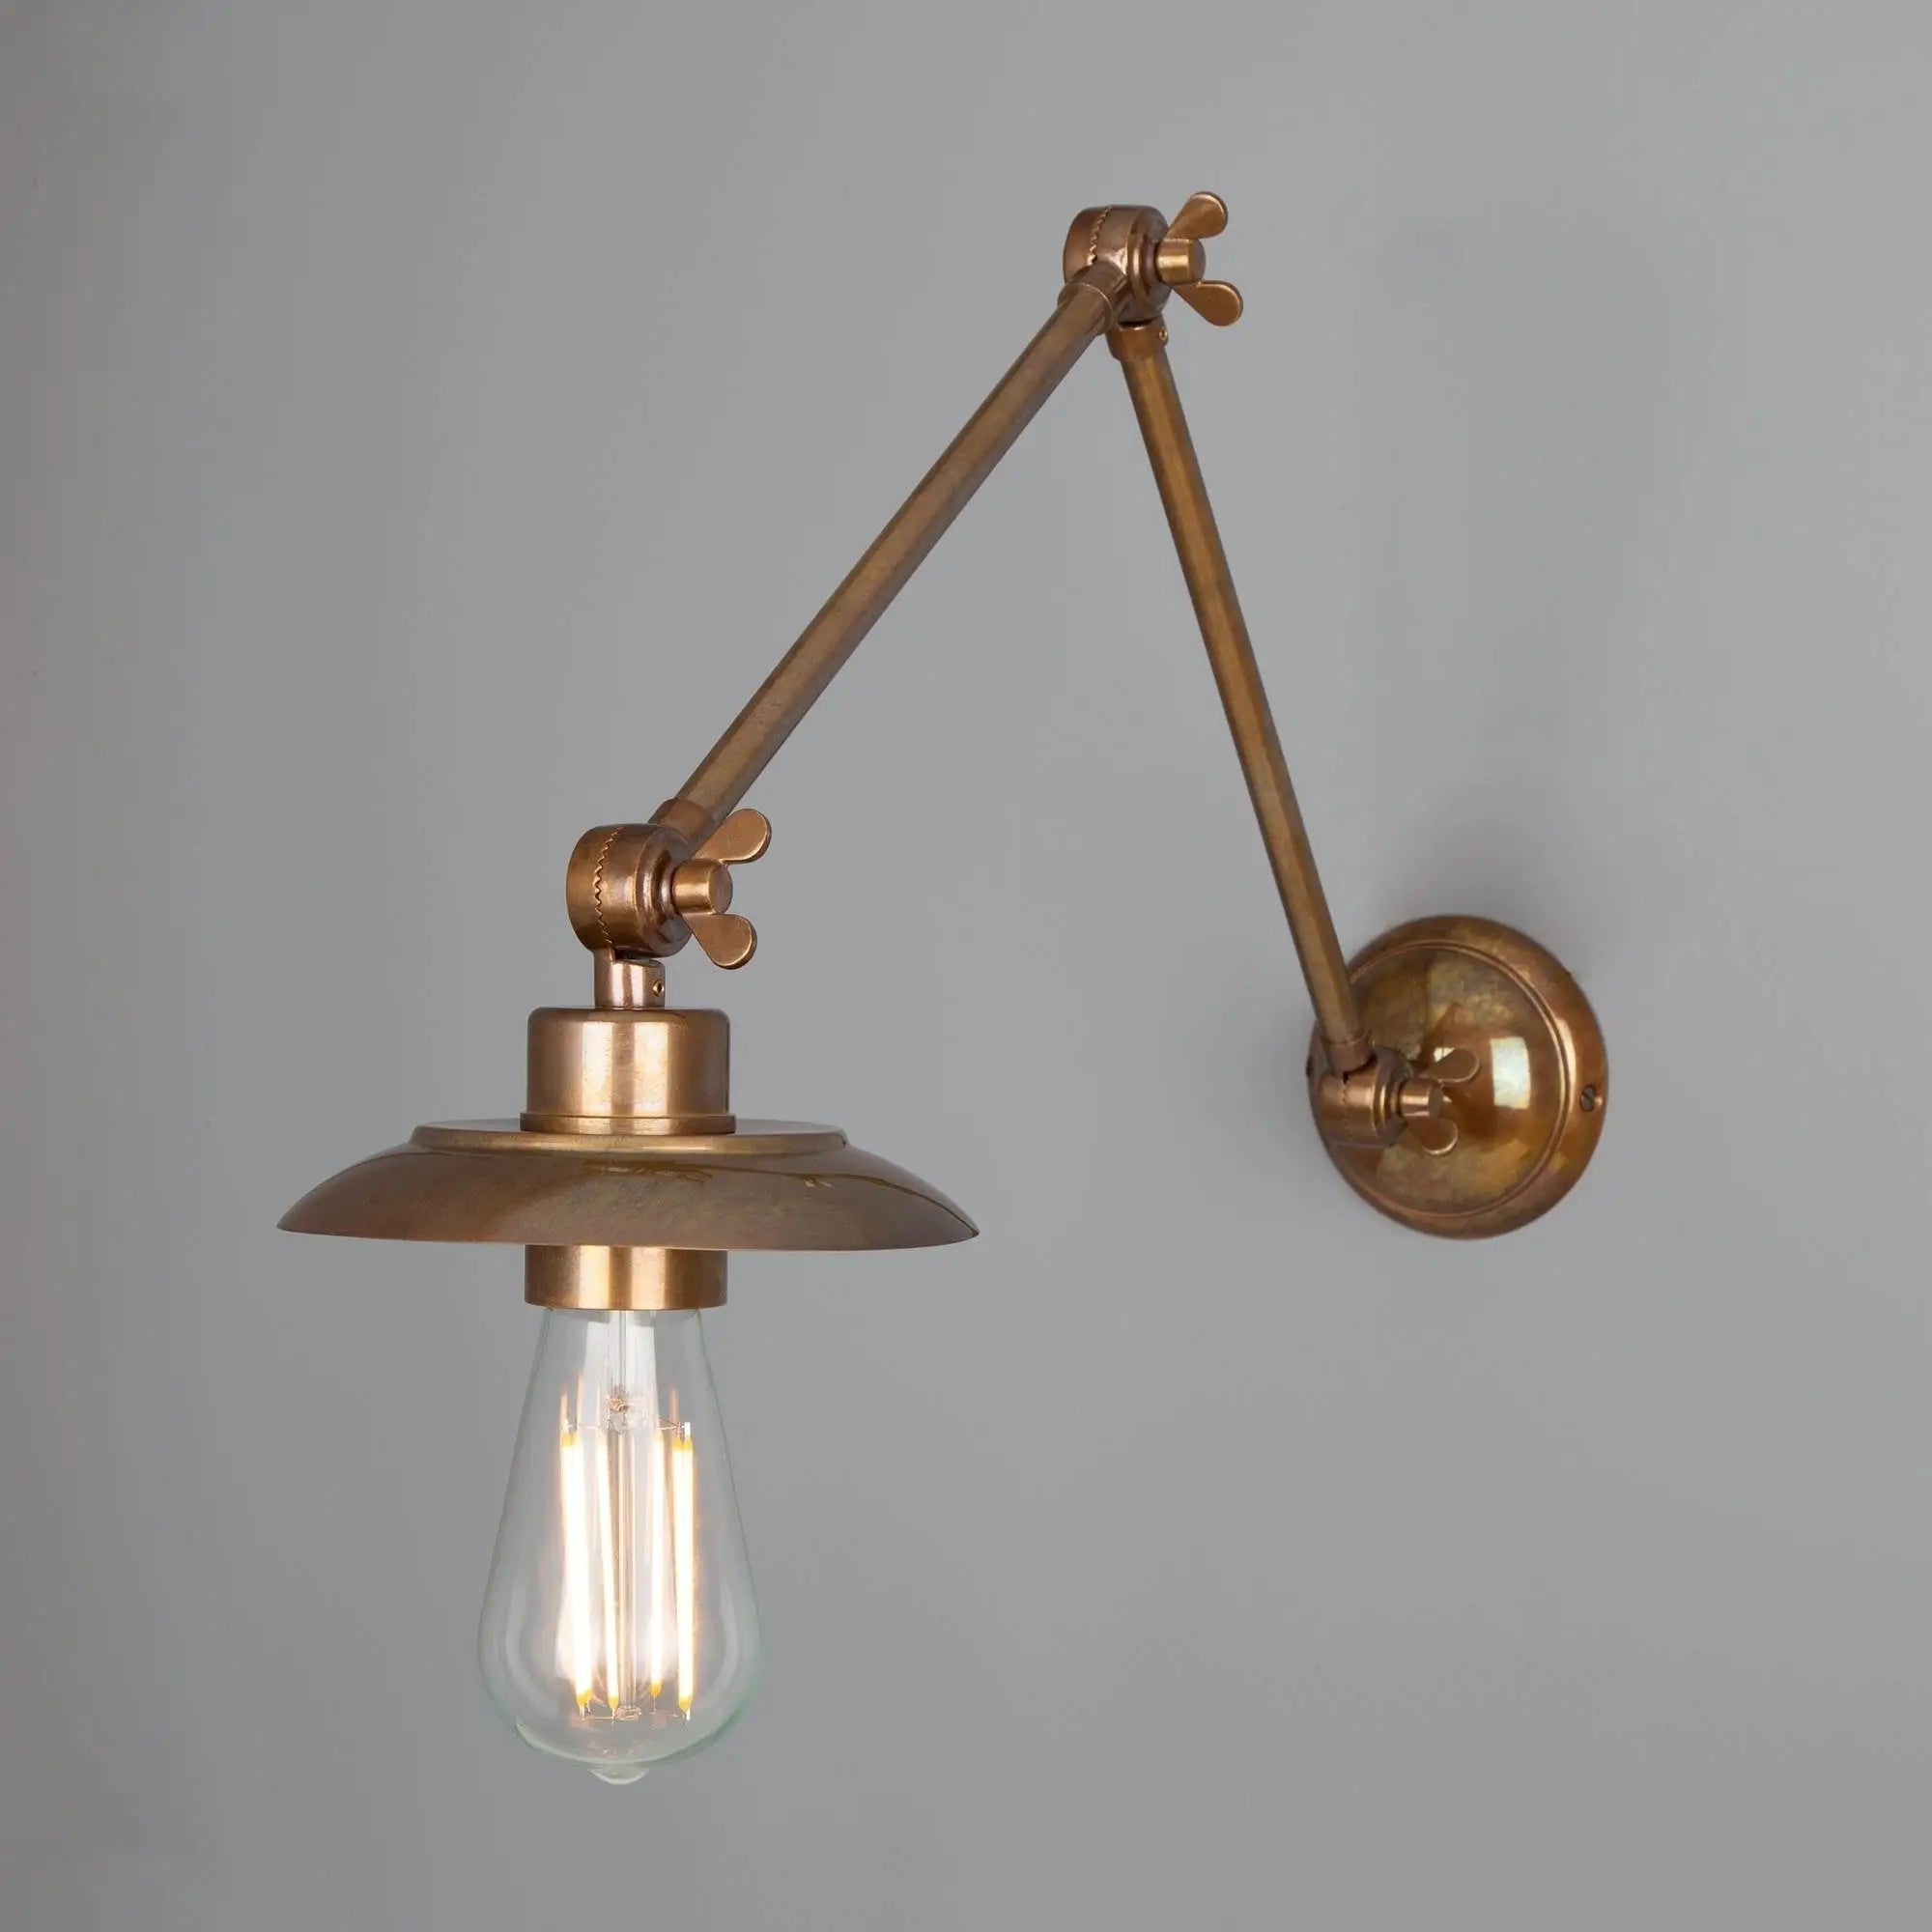 Shop Swing Arm Wall Lamps - Versatile And Stylish Lighting For Your Home